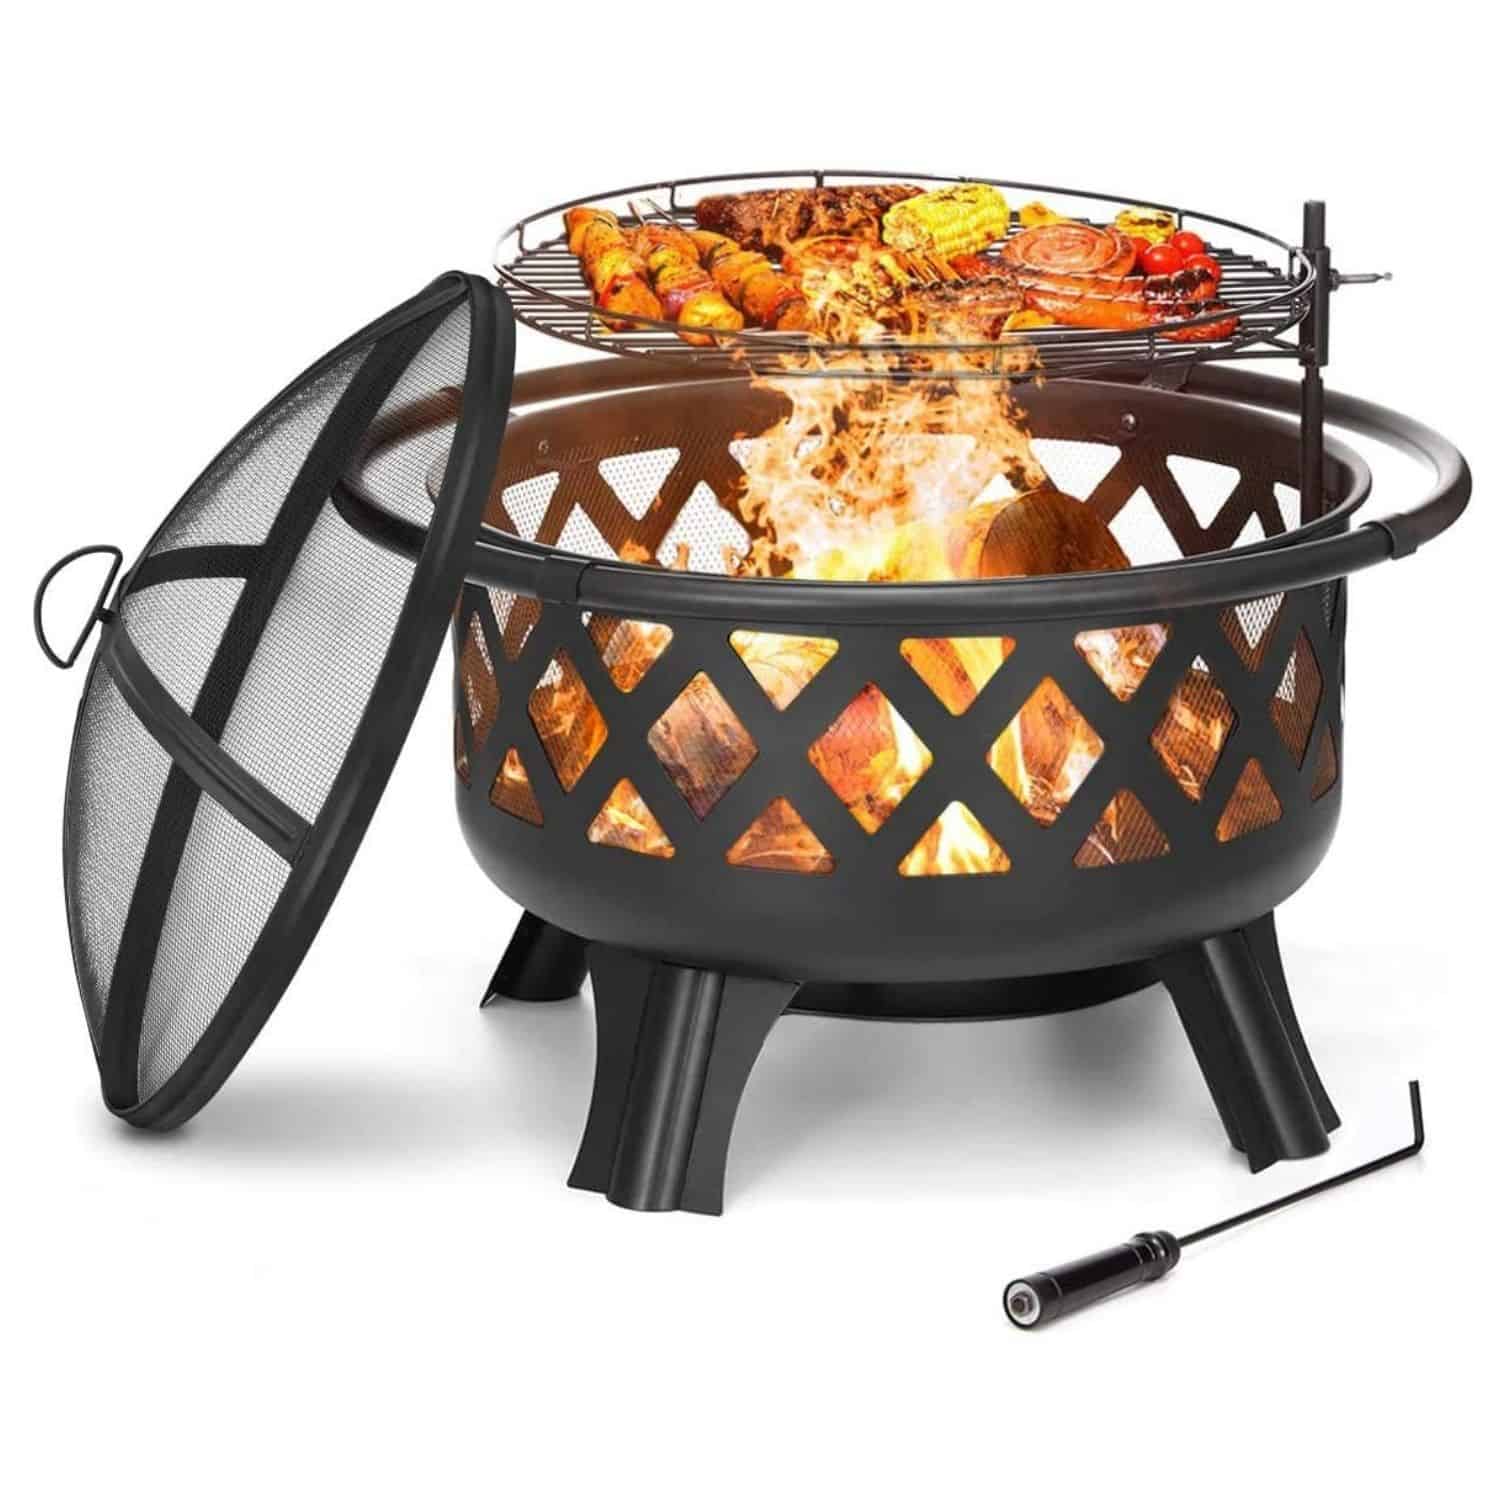 Kingso 2-in-1 Outdoor Heavy Duty Fire Pit with Cooking Grate